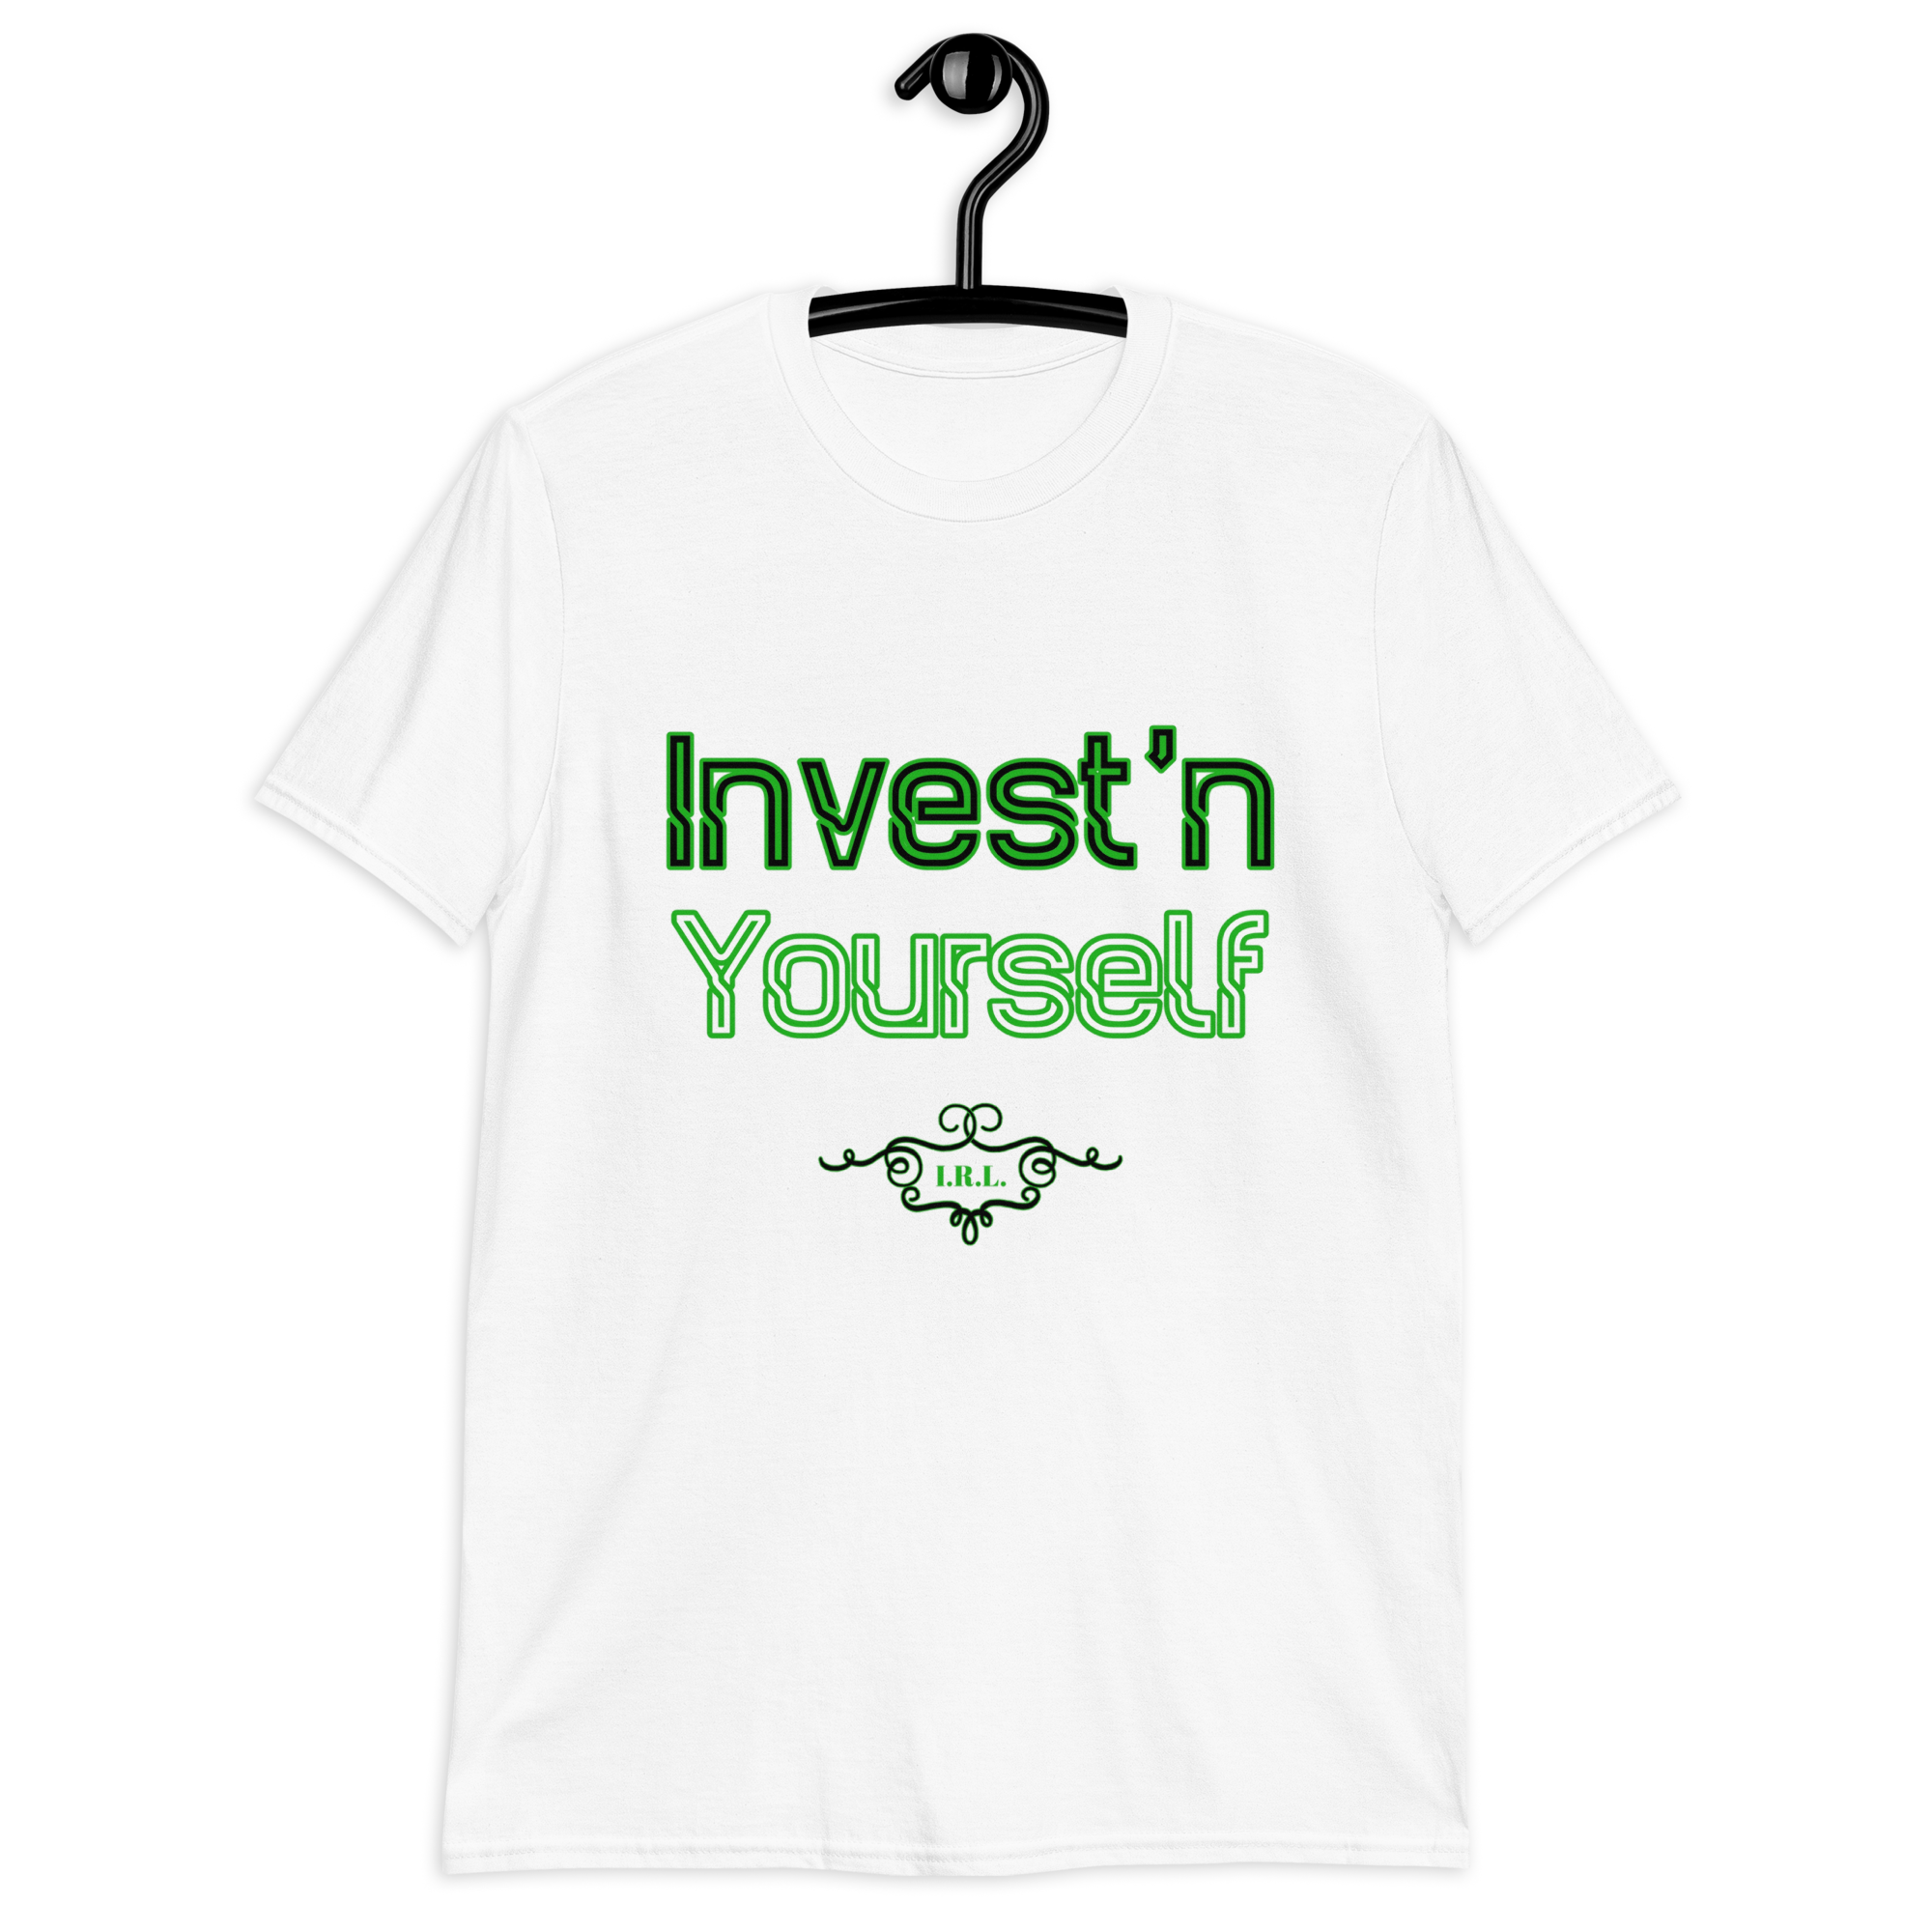 "Invest'n Yourself" Unisex T-Shirt